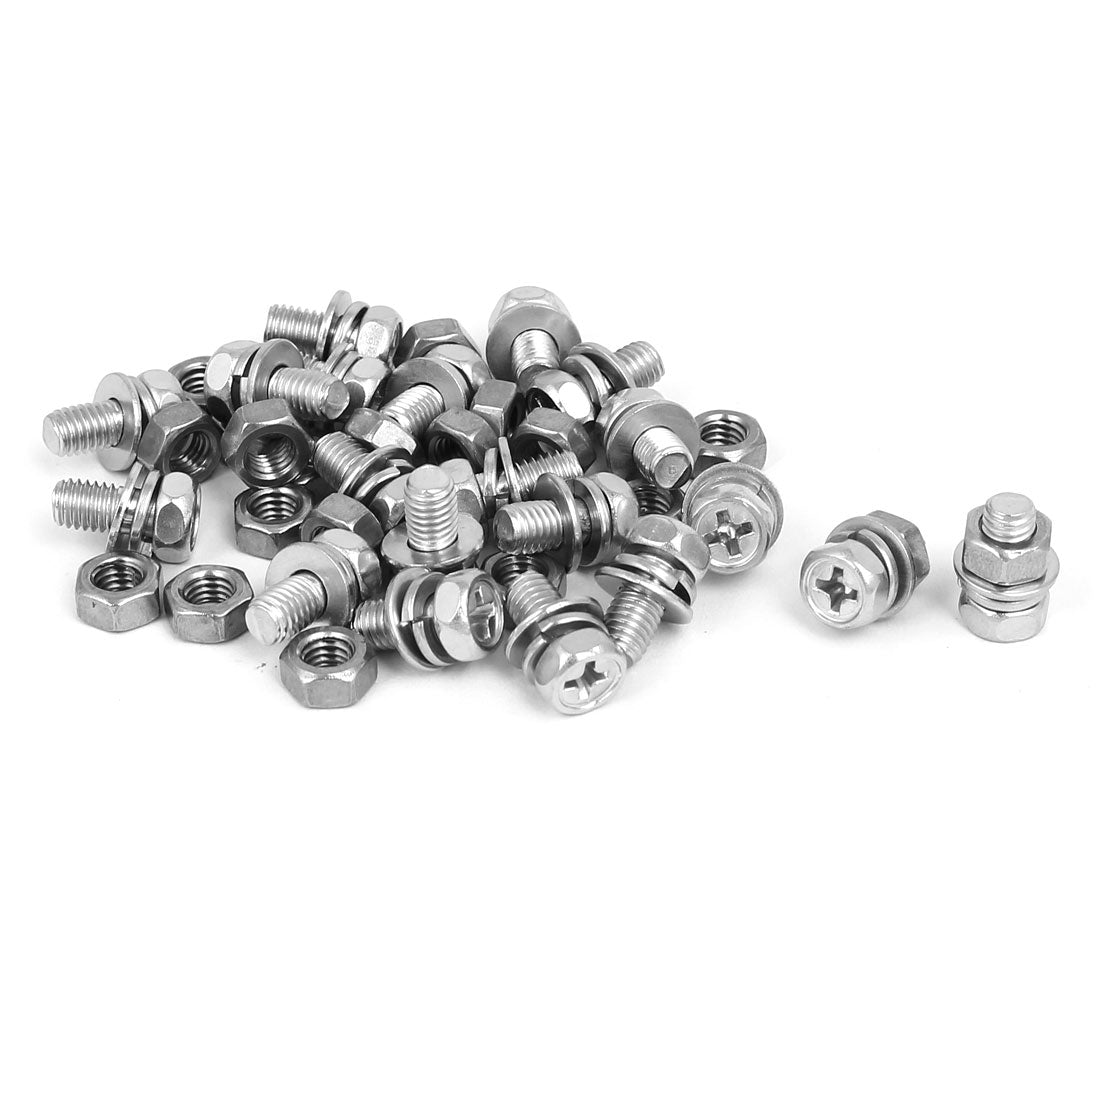 uxcell Uxcell M5 x 10mm 304 Stainless Steel Phillips Hex Head Bolts Nuts w Washers 20 Sets